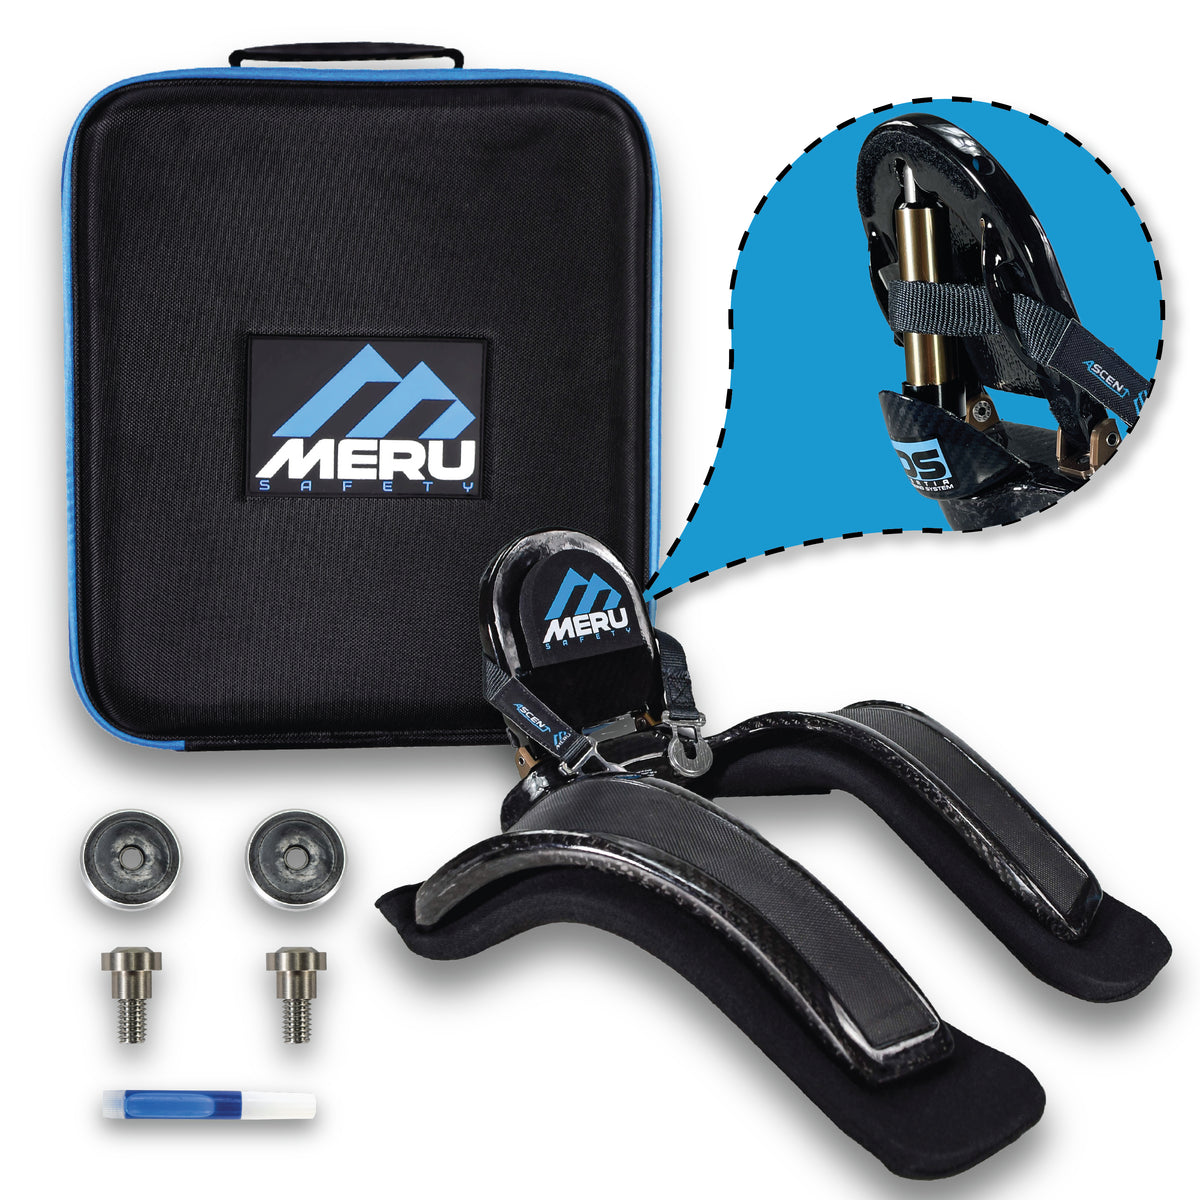 Meru Safety Racing Ascent Carbon Head & Neck Restraint with Quick Release Tethers & Shock Absorber Reduces Force from Frontal Impacts (Small/Medium)